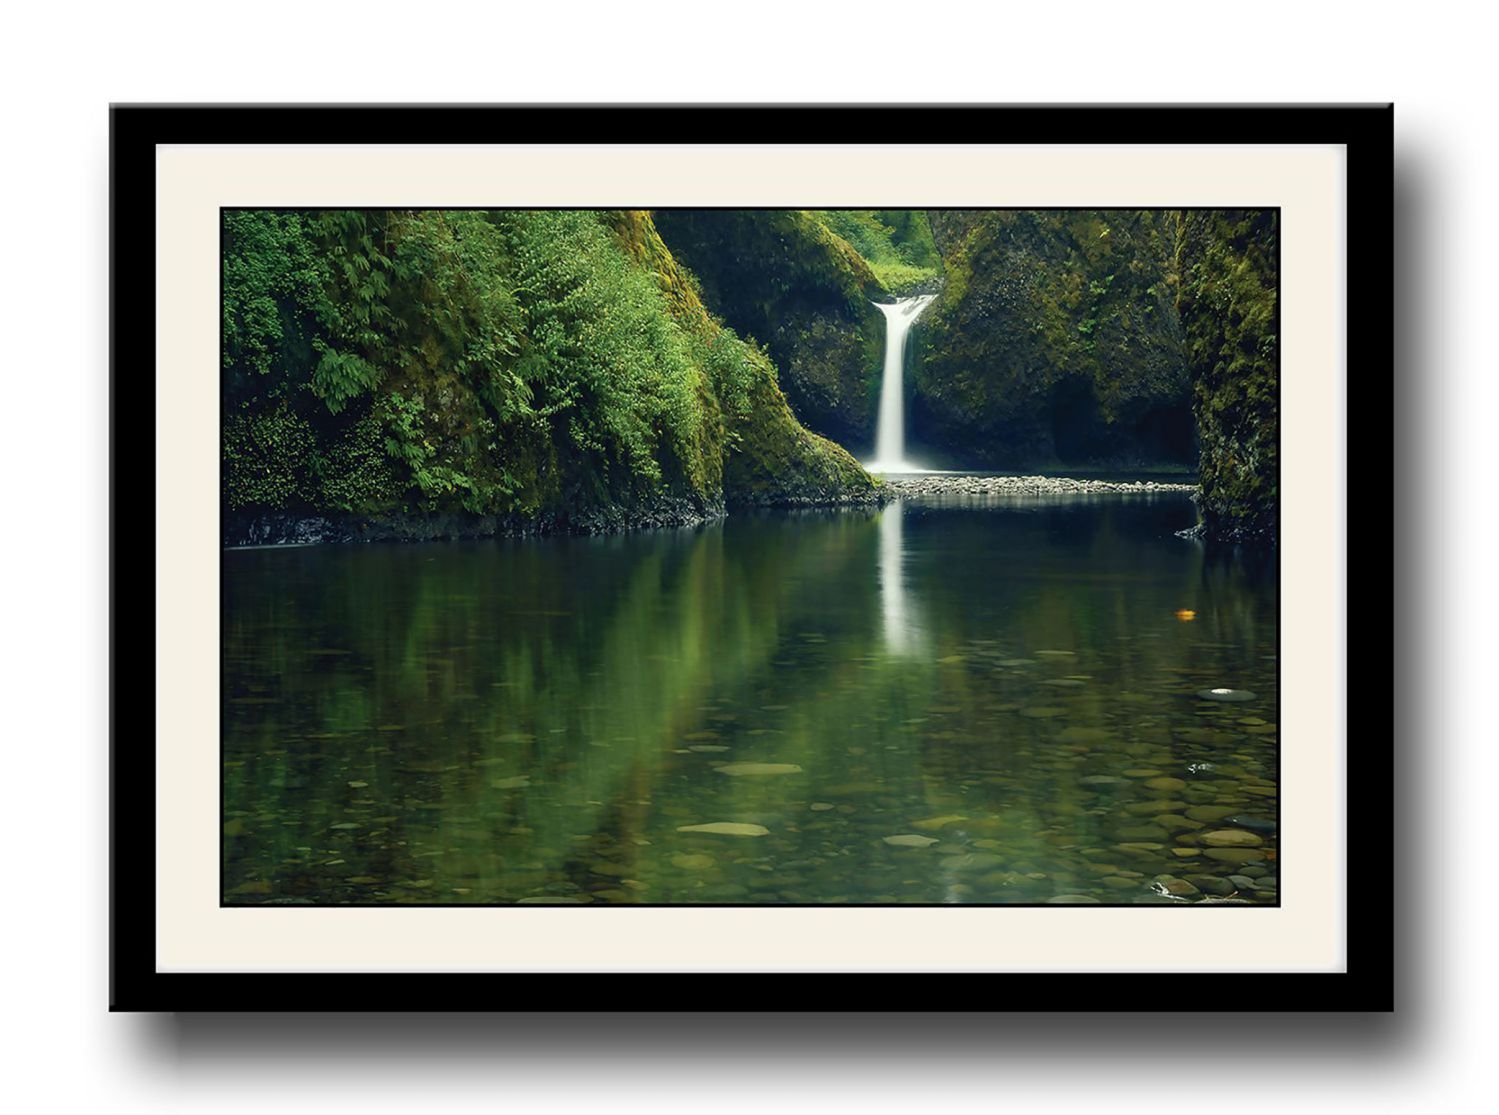 Buy Beautiful Waterfall Amazing Framed Wall Painting Online @ ₹589 from ...